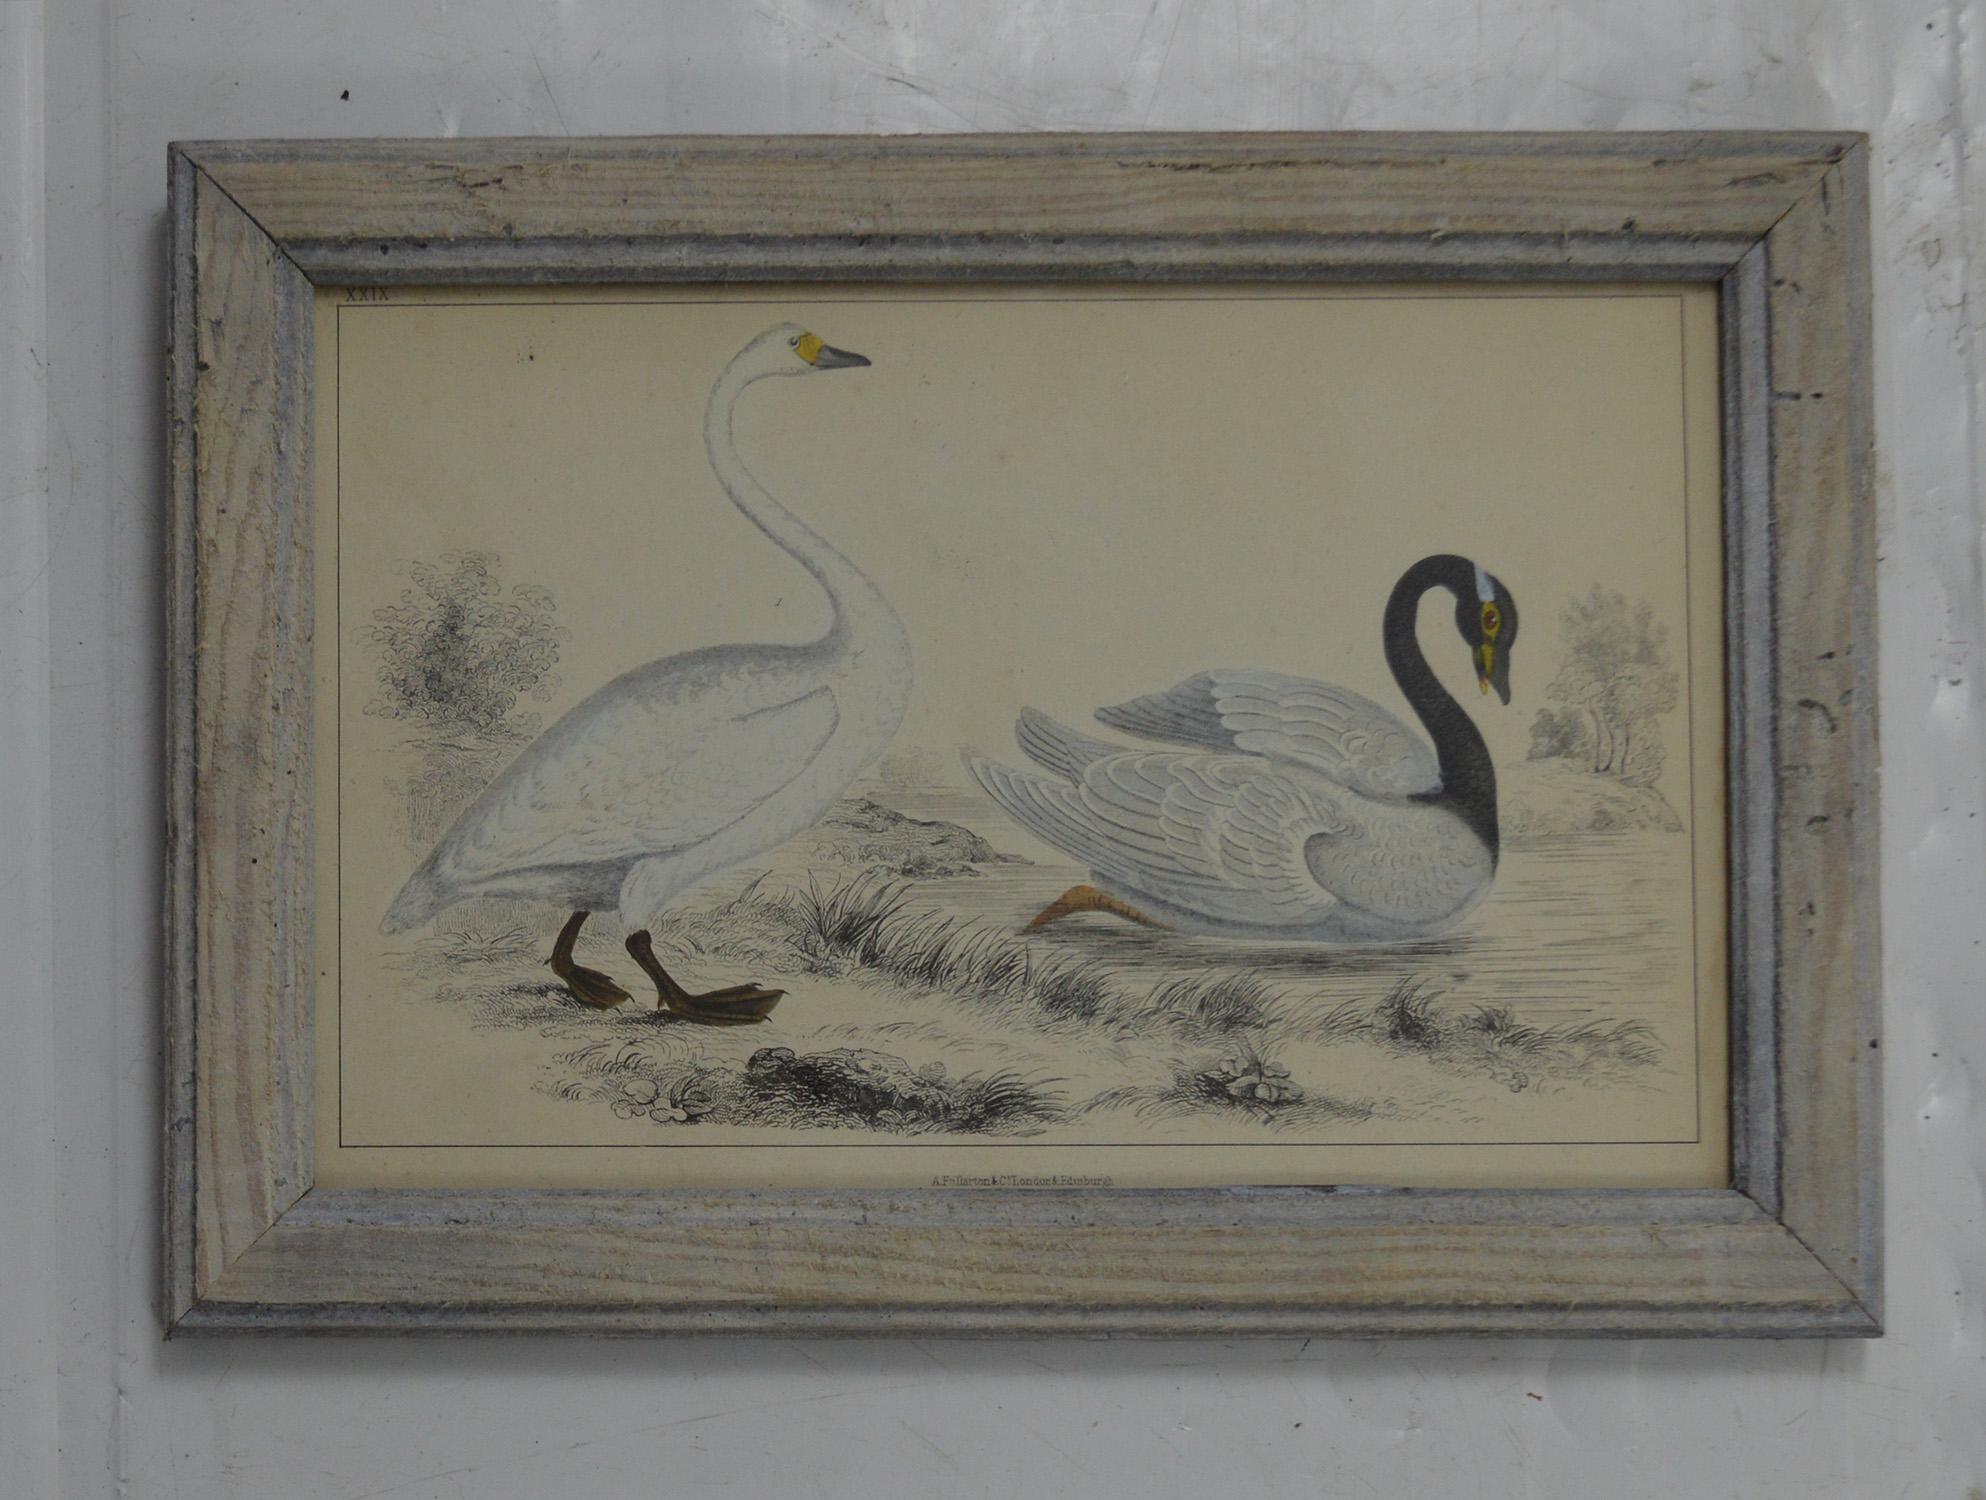 Great image of two swans presented in an antique distressed pine frame.

Original hand colored lithograph after Cpt. Brown.

Published by Fullerton, 1847.